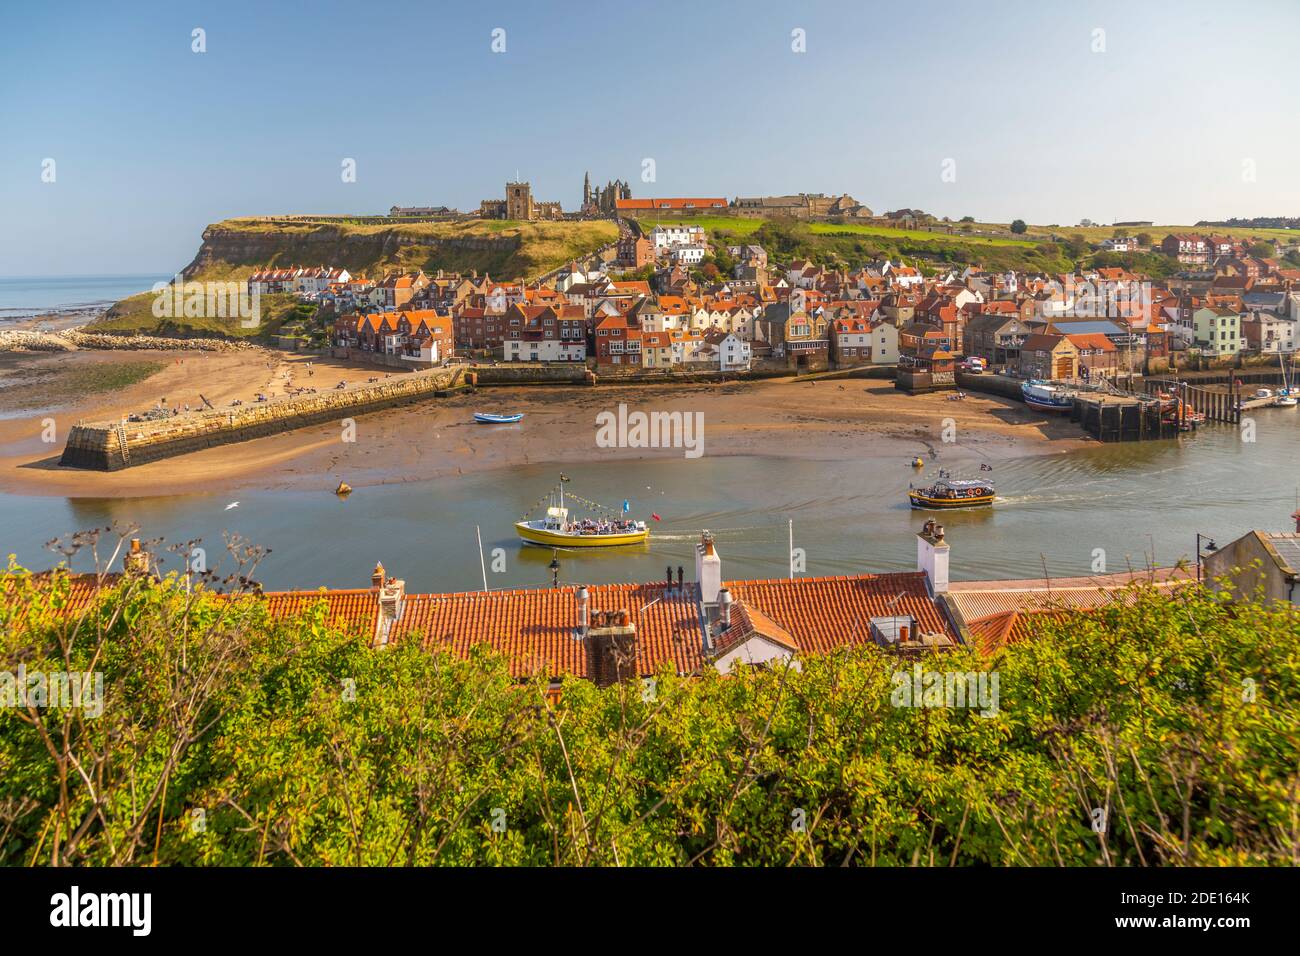 View of Whitby Abbey, St. Mary's Church and Esk riverside houses, Whitby, Yorkshire, England, United Kingdom, Europe Stock Photo